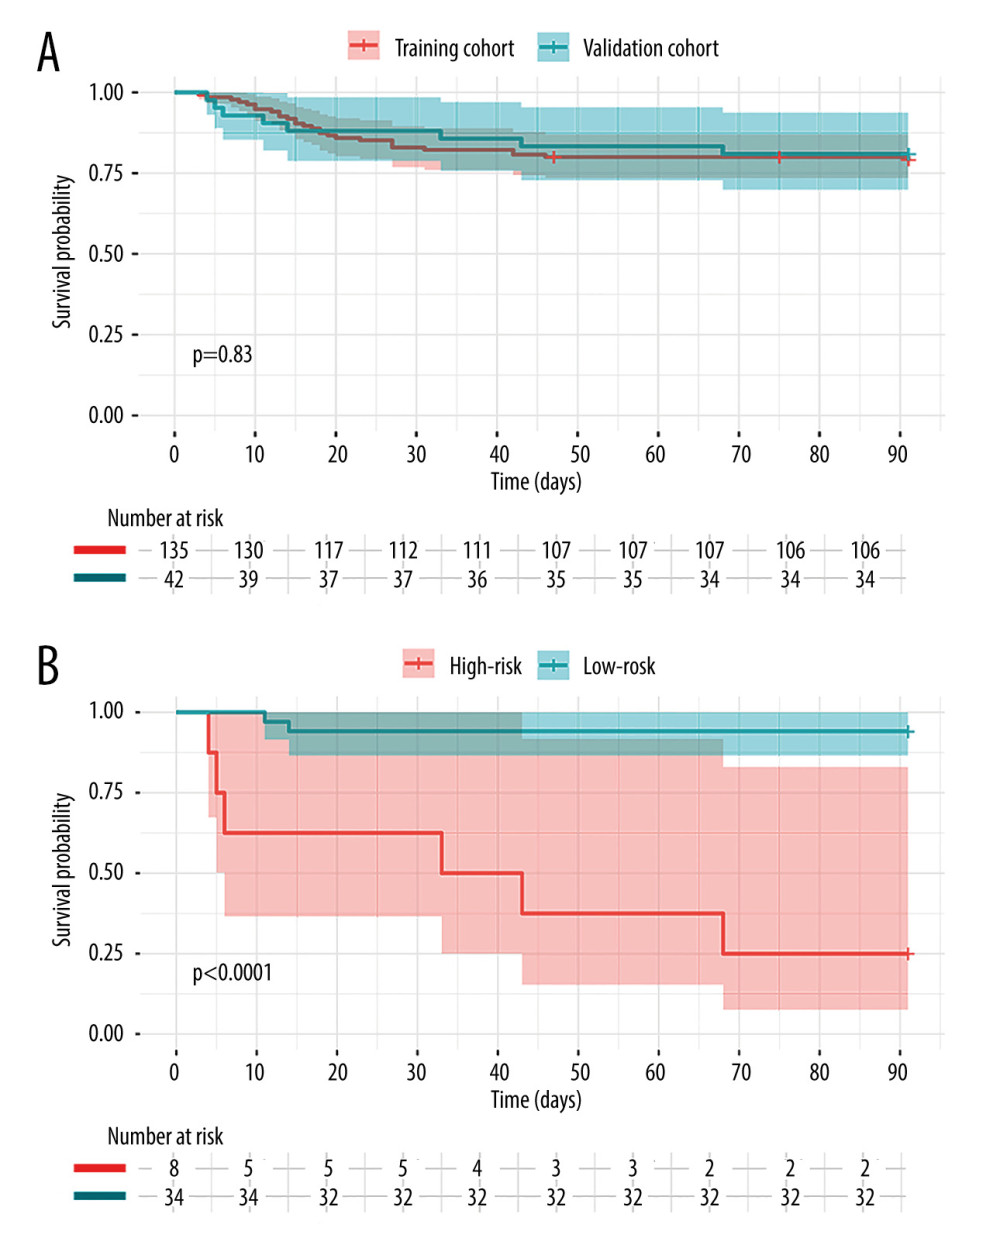 (A) Kaplan-Meier survival analysis of the 2 groups at 3 months. The red line and blue line represent training cohort and validation cohort, respectively. (B) The survival curve in the validation cohort. The red line is the high-risk group with Risk score ≥2.361 and the blue line is low-risk group with Risk score <2.361.